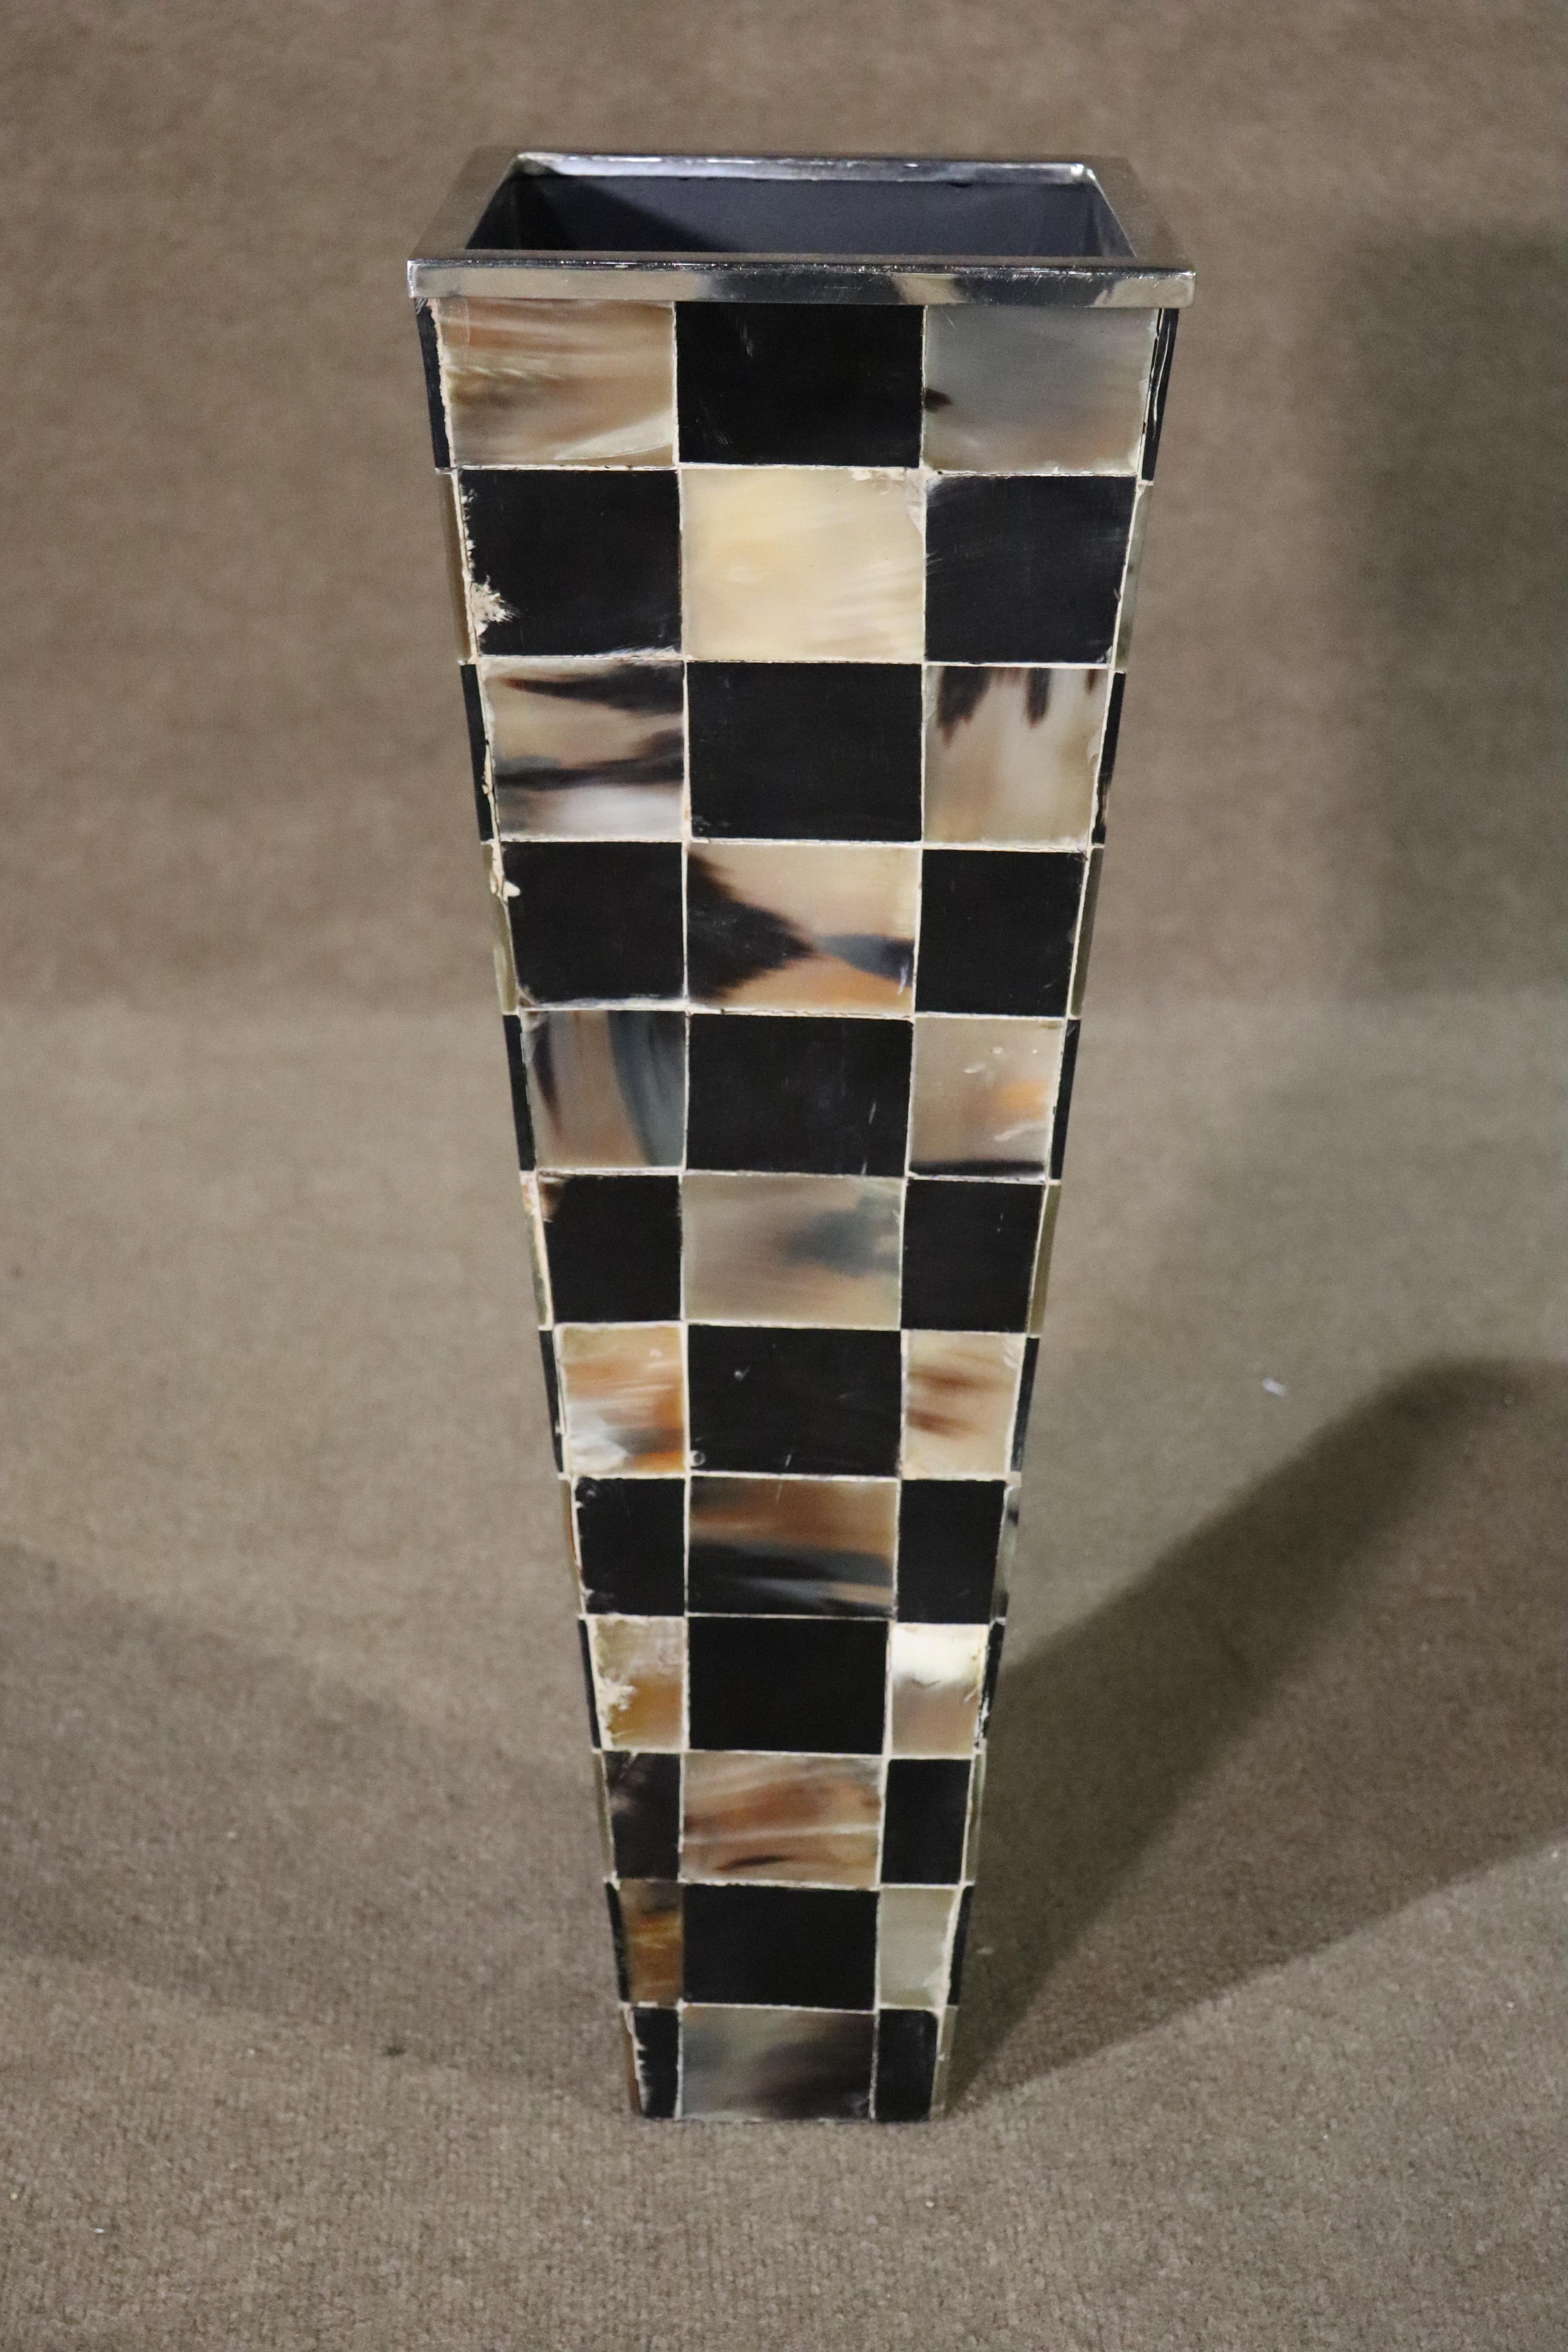 Decorative umbrella stand/vase with two tone checkerboard pattern. horn veneers on a wood tapering frame and chromed metal top rim.
Please confirm location NY or NJ